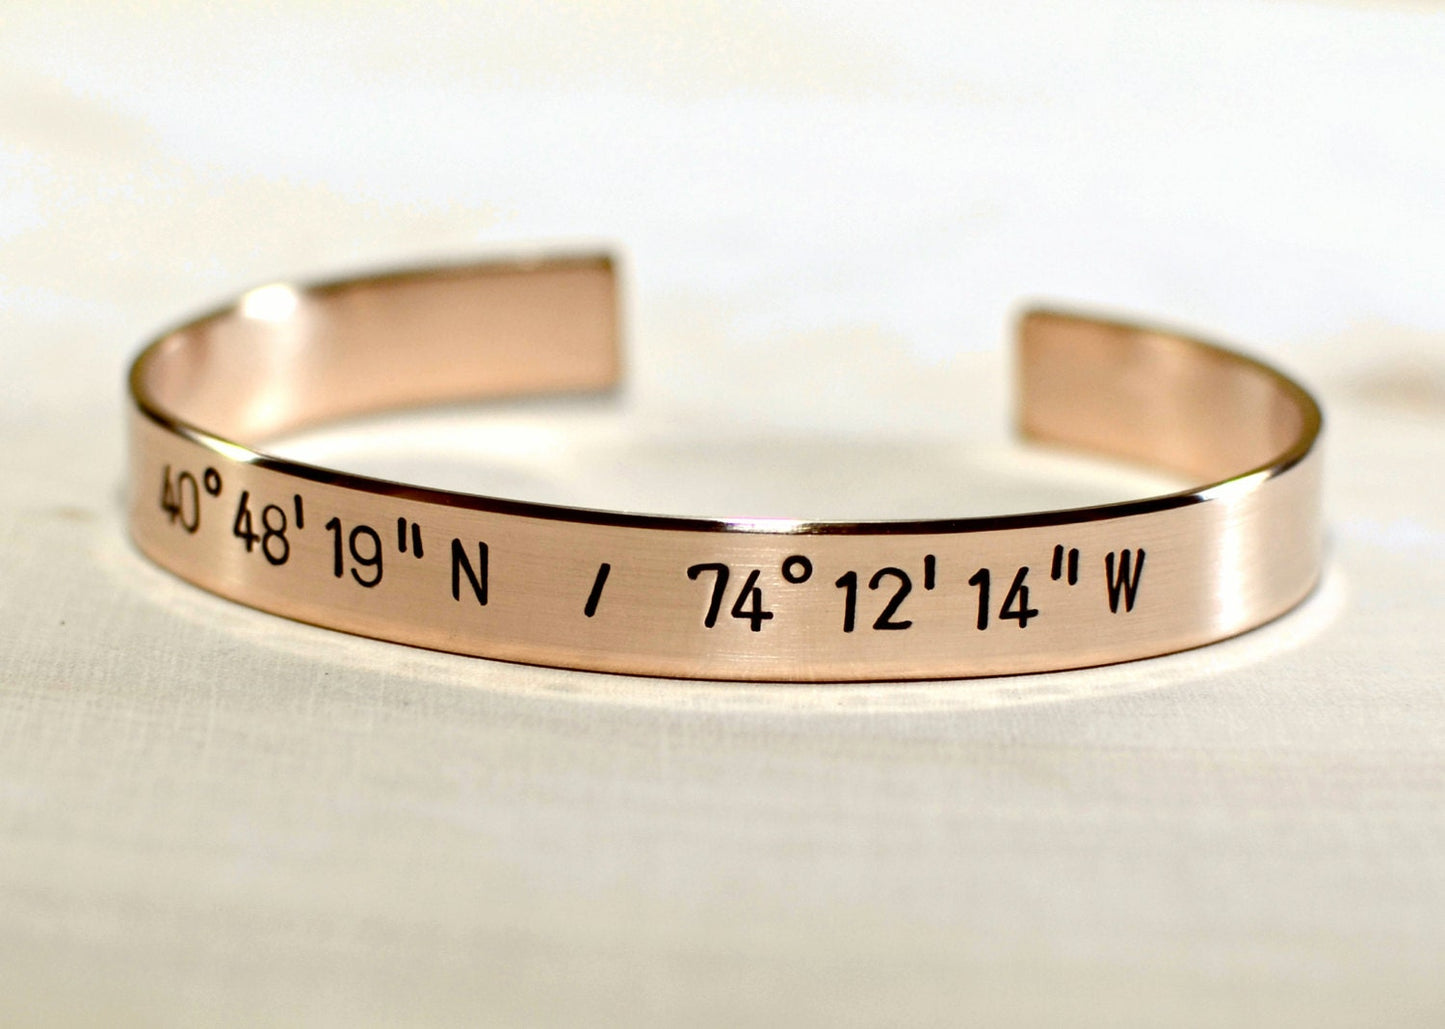 Bronze cuff bracelet personalized for graduation birthdays  8th anniversary and 19th anniversary gifts